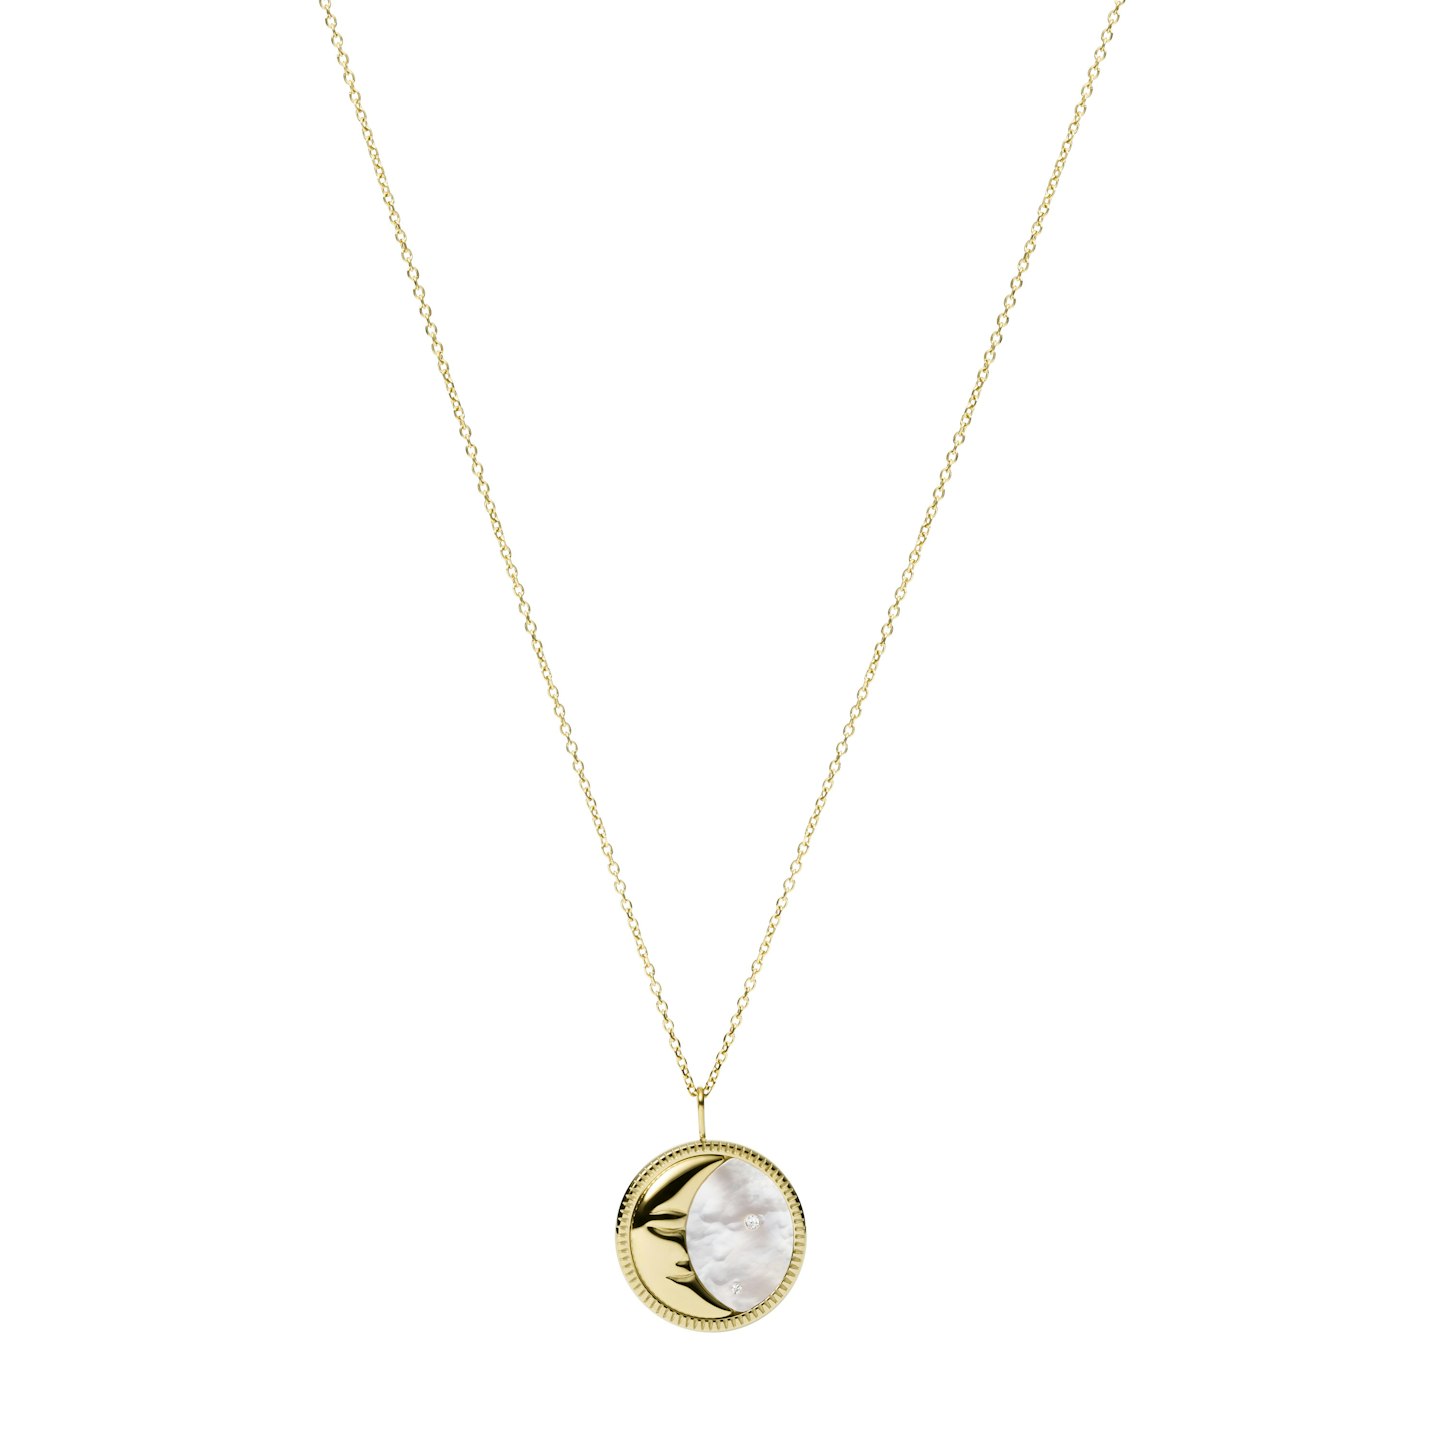 Fossil Georgia Moonphase White Mother-of-Pearl Pendant Necklace